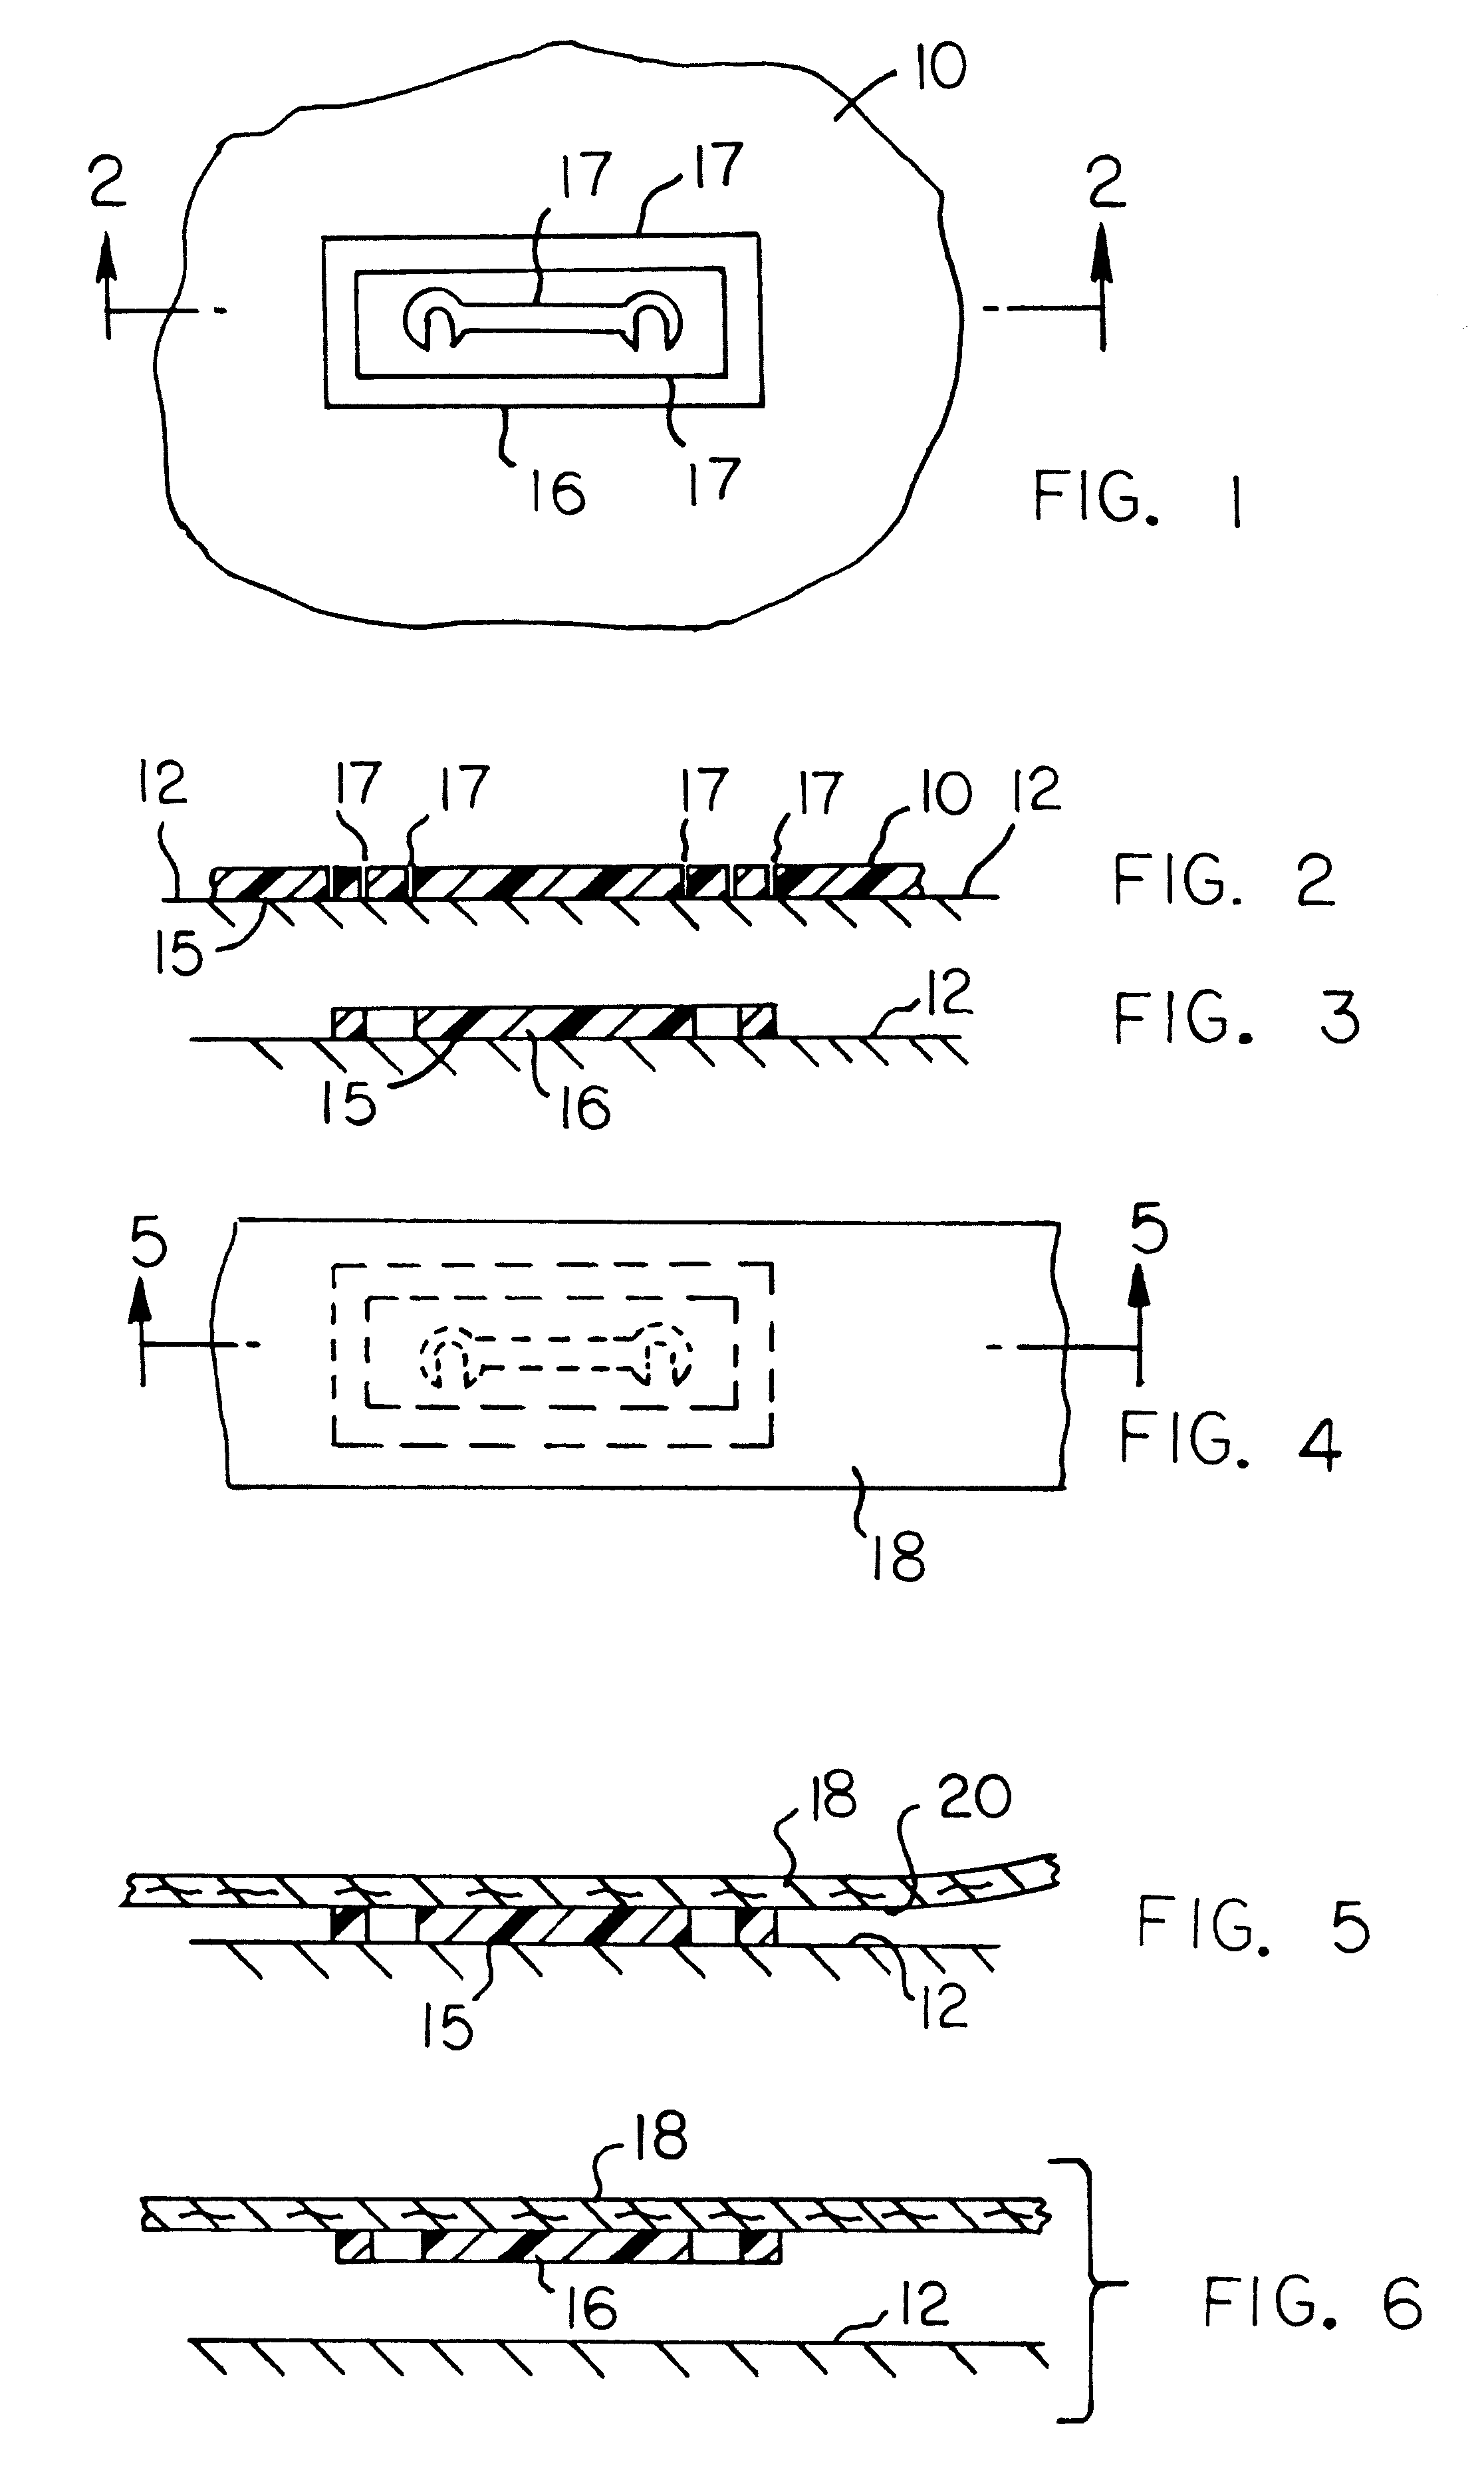 Method of forming a printed circuit board